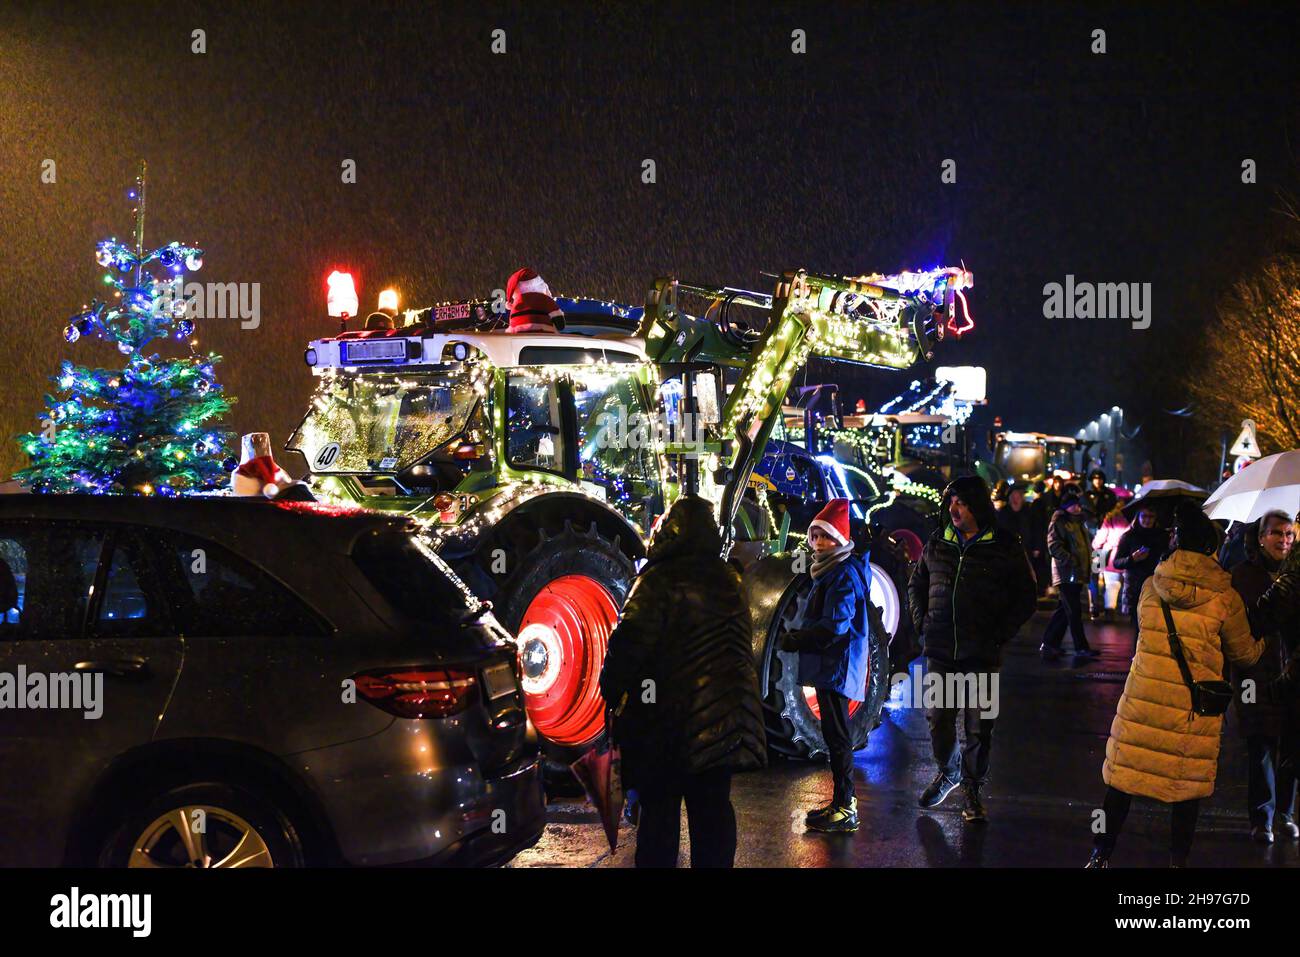 Germany ,Bamberg, Brose Arena - 04 Dec 2021 - Local News - Tractor Christmas display in Bamberg   Image: Farmers from Landkreis Bamberg invited the other farmers from the surrounding regions to participate in a tour through the city of Bamberg, Germany displaying their tractors decorated with Christmas themes. Credit: Ryan Evans/Alamy Live News Stock Photo